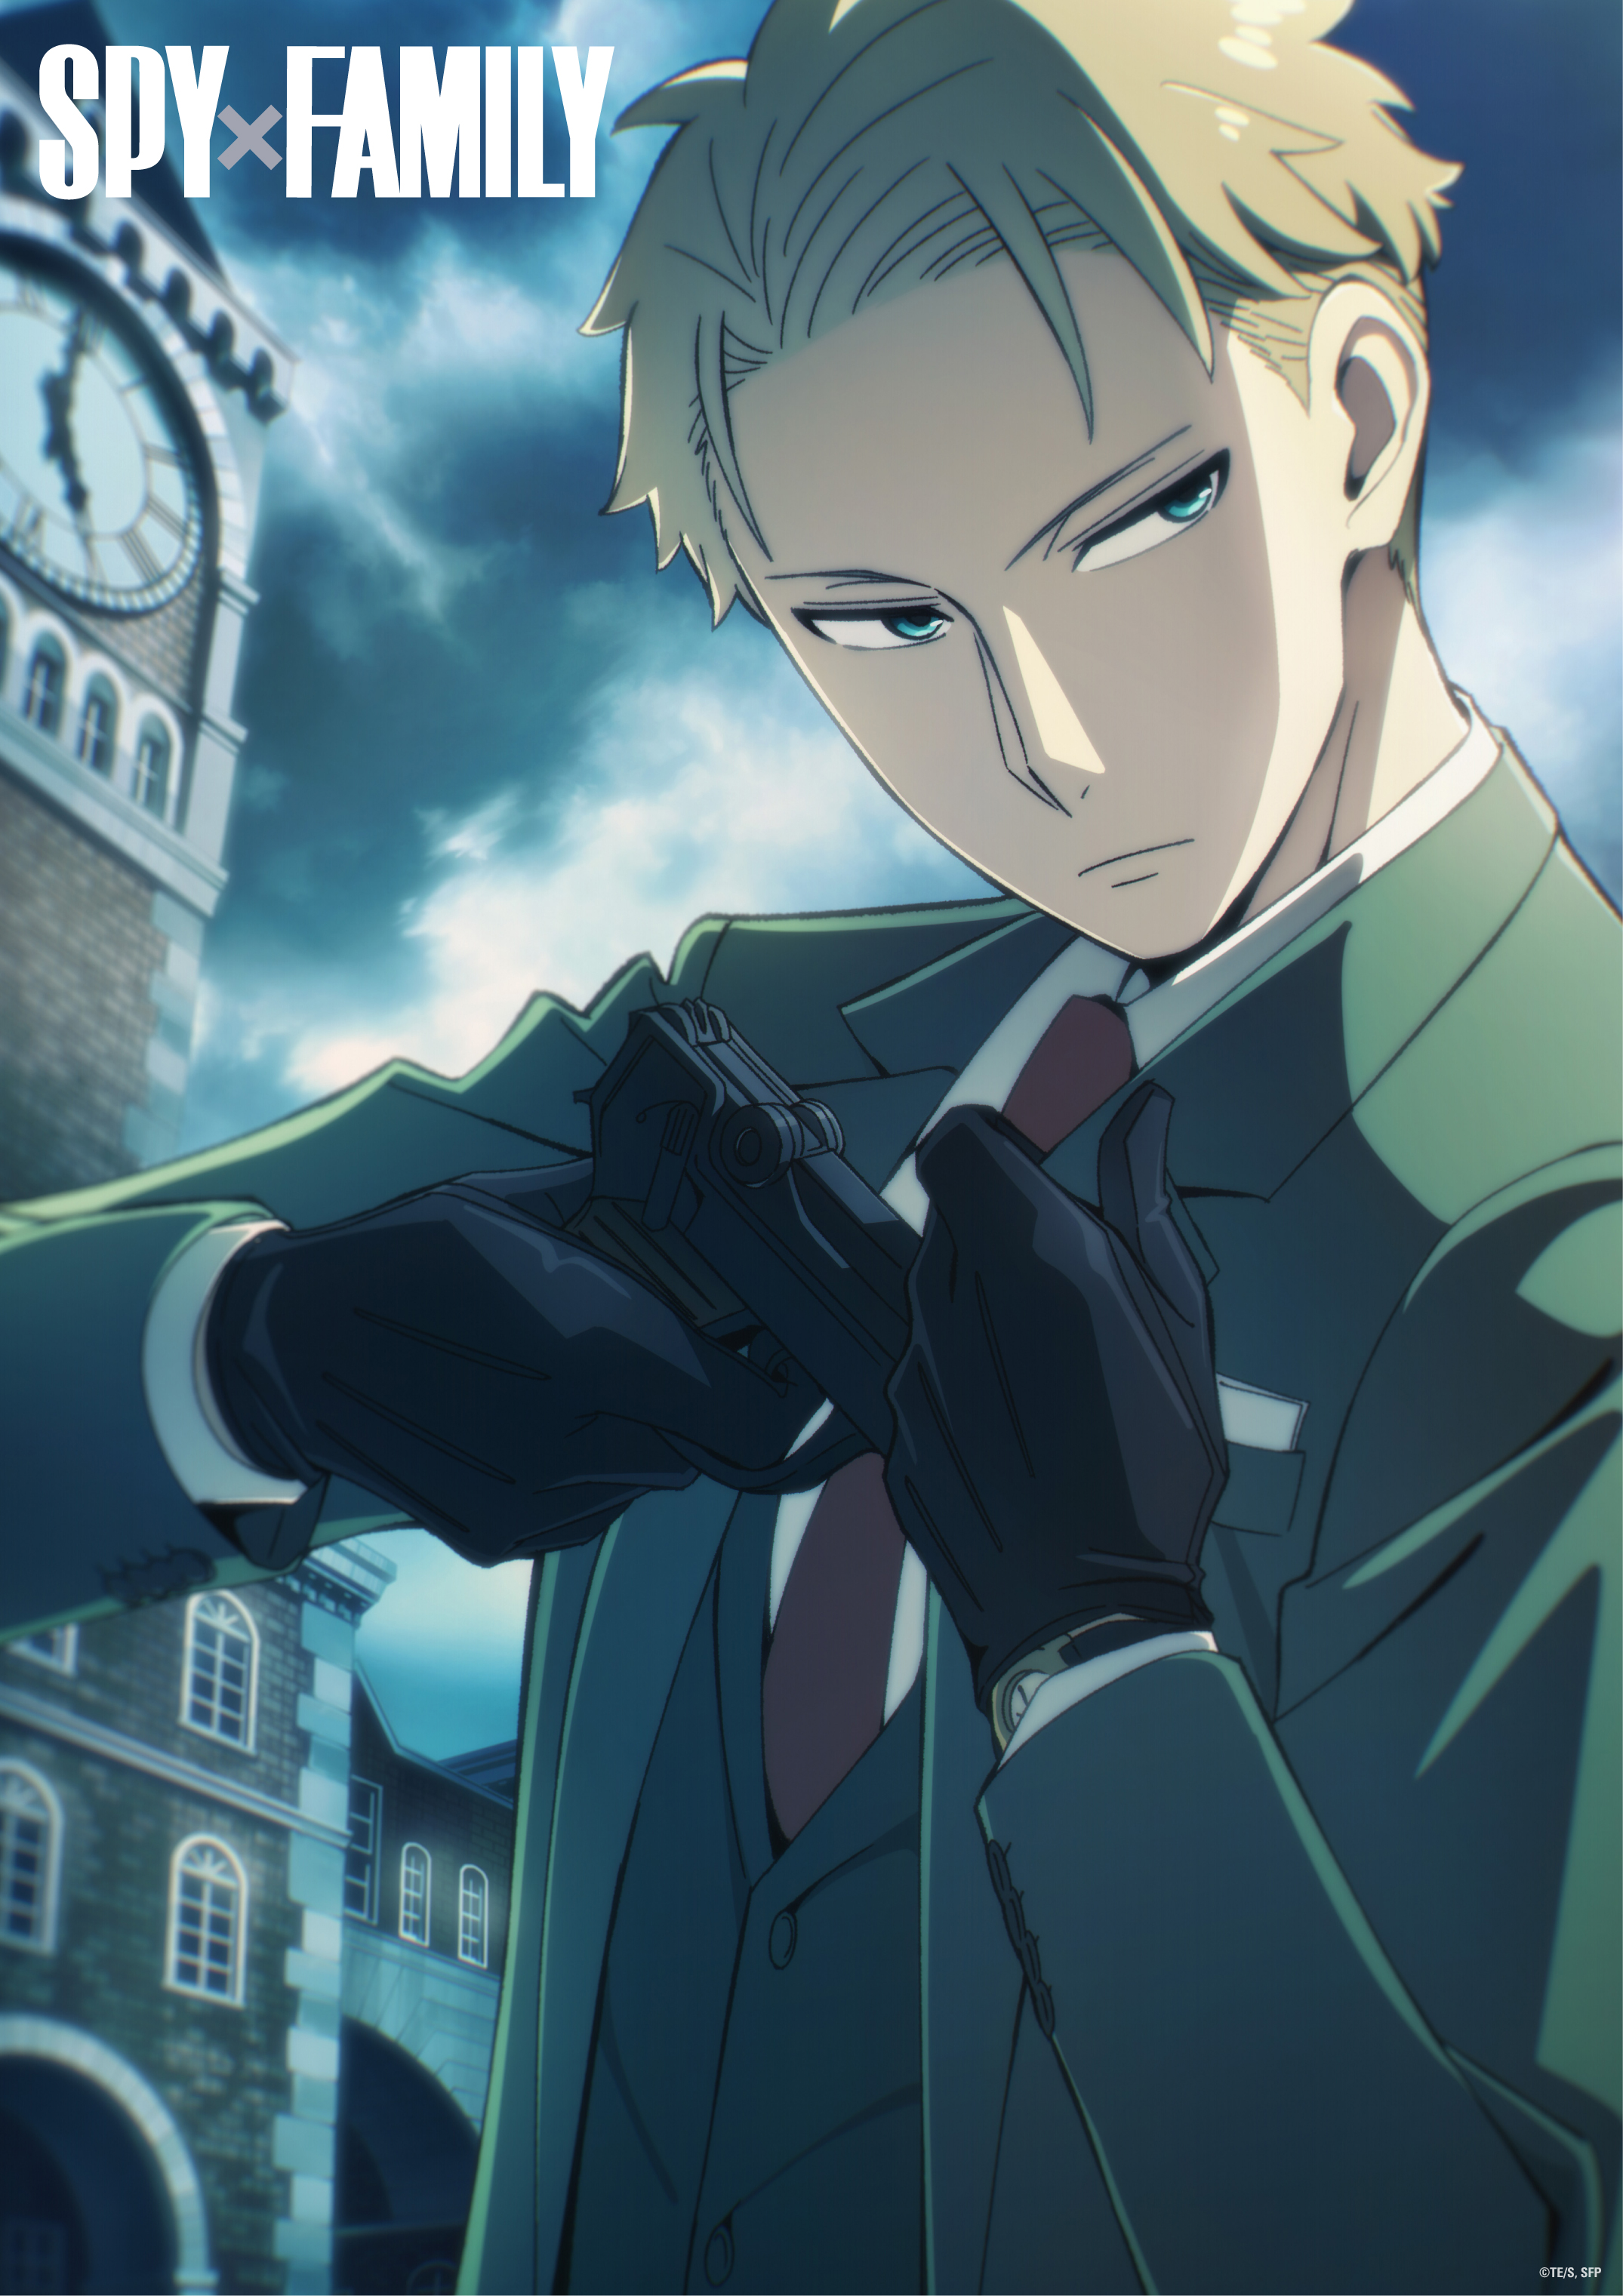 Crunchyroll - Trio of New Character Visuals Unclassified for SPY x FAMILY  TV Anime